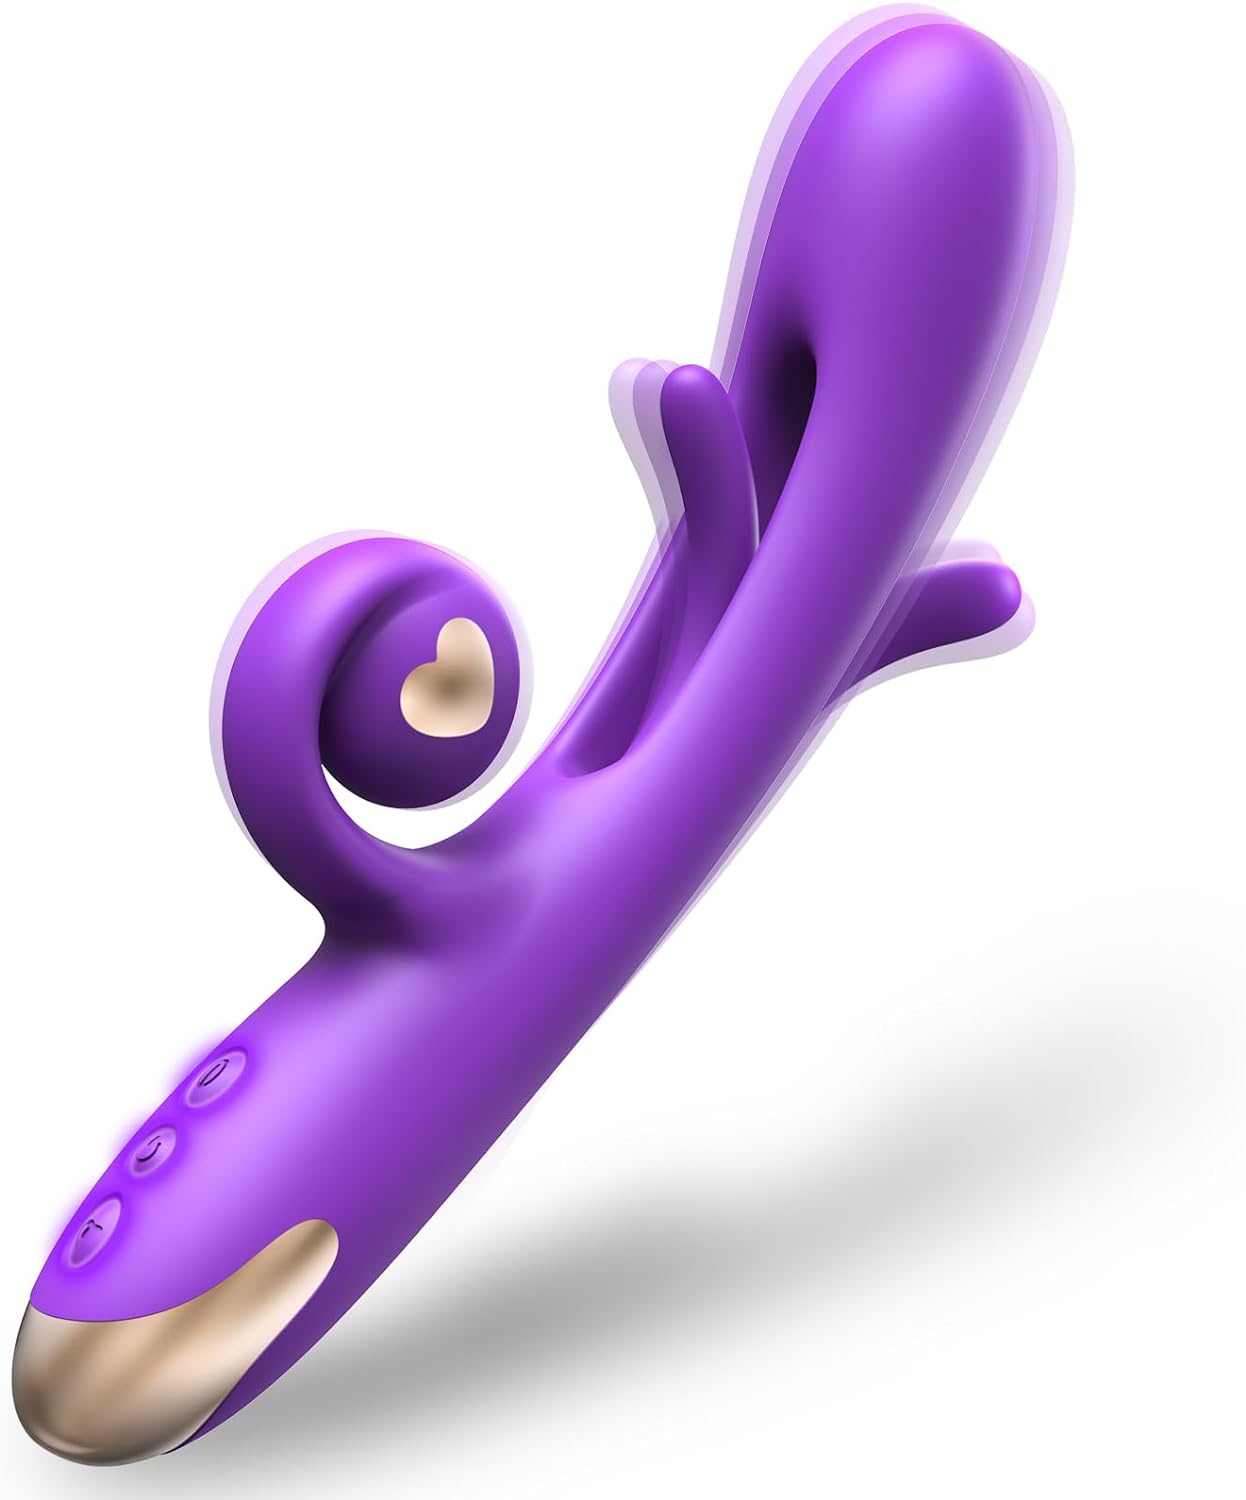 G Spot Vibrator Dildo Sex Toy: Rabbit Adult Toys with 10 Vibration 7 Flapping, Silicone Waterproof Personal Vibrator for Clitoral Nipple Anal Stimulation, Rechargeable Adult Toy for Women, Tlora